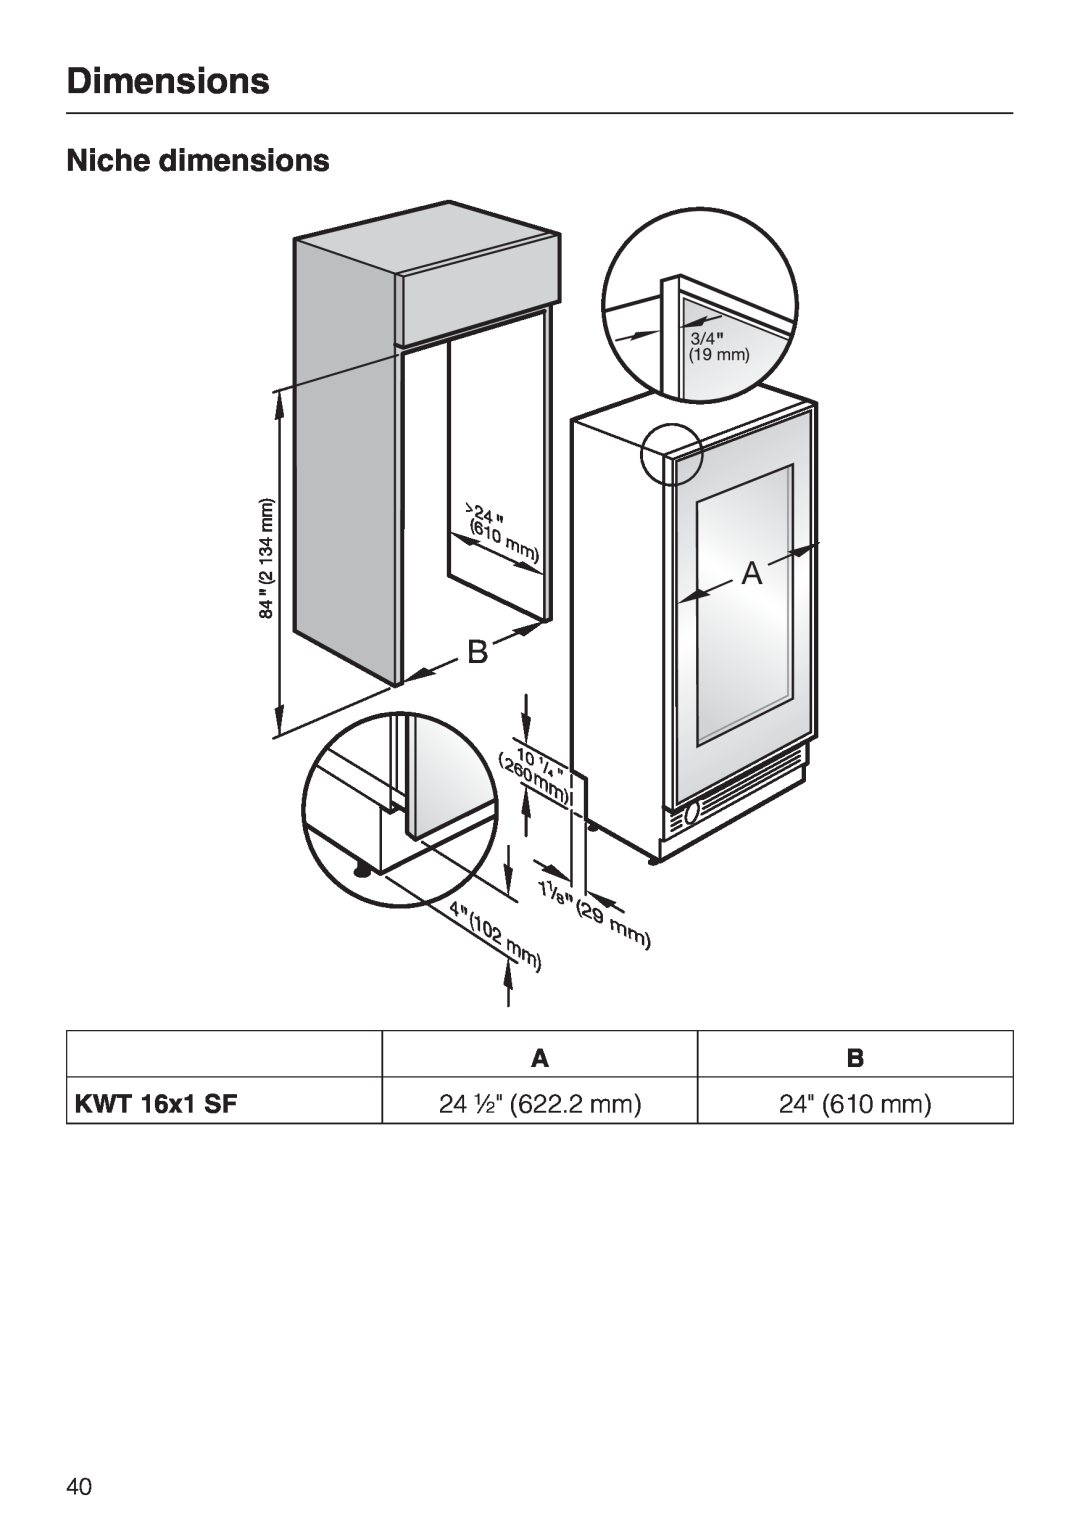 Miele KWT 1601 SF, KWT 1611 SF installation instructions Niche dimensions, KWT 16x1 SF, 24 ½ 622.2 mm, 24 610 mm, Dimensions 